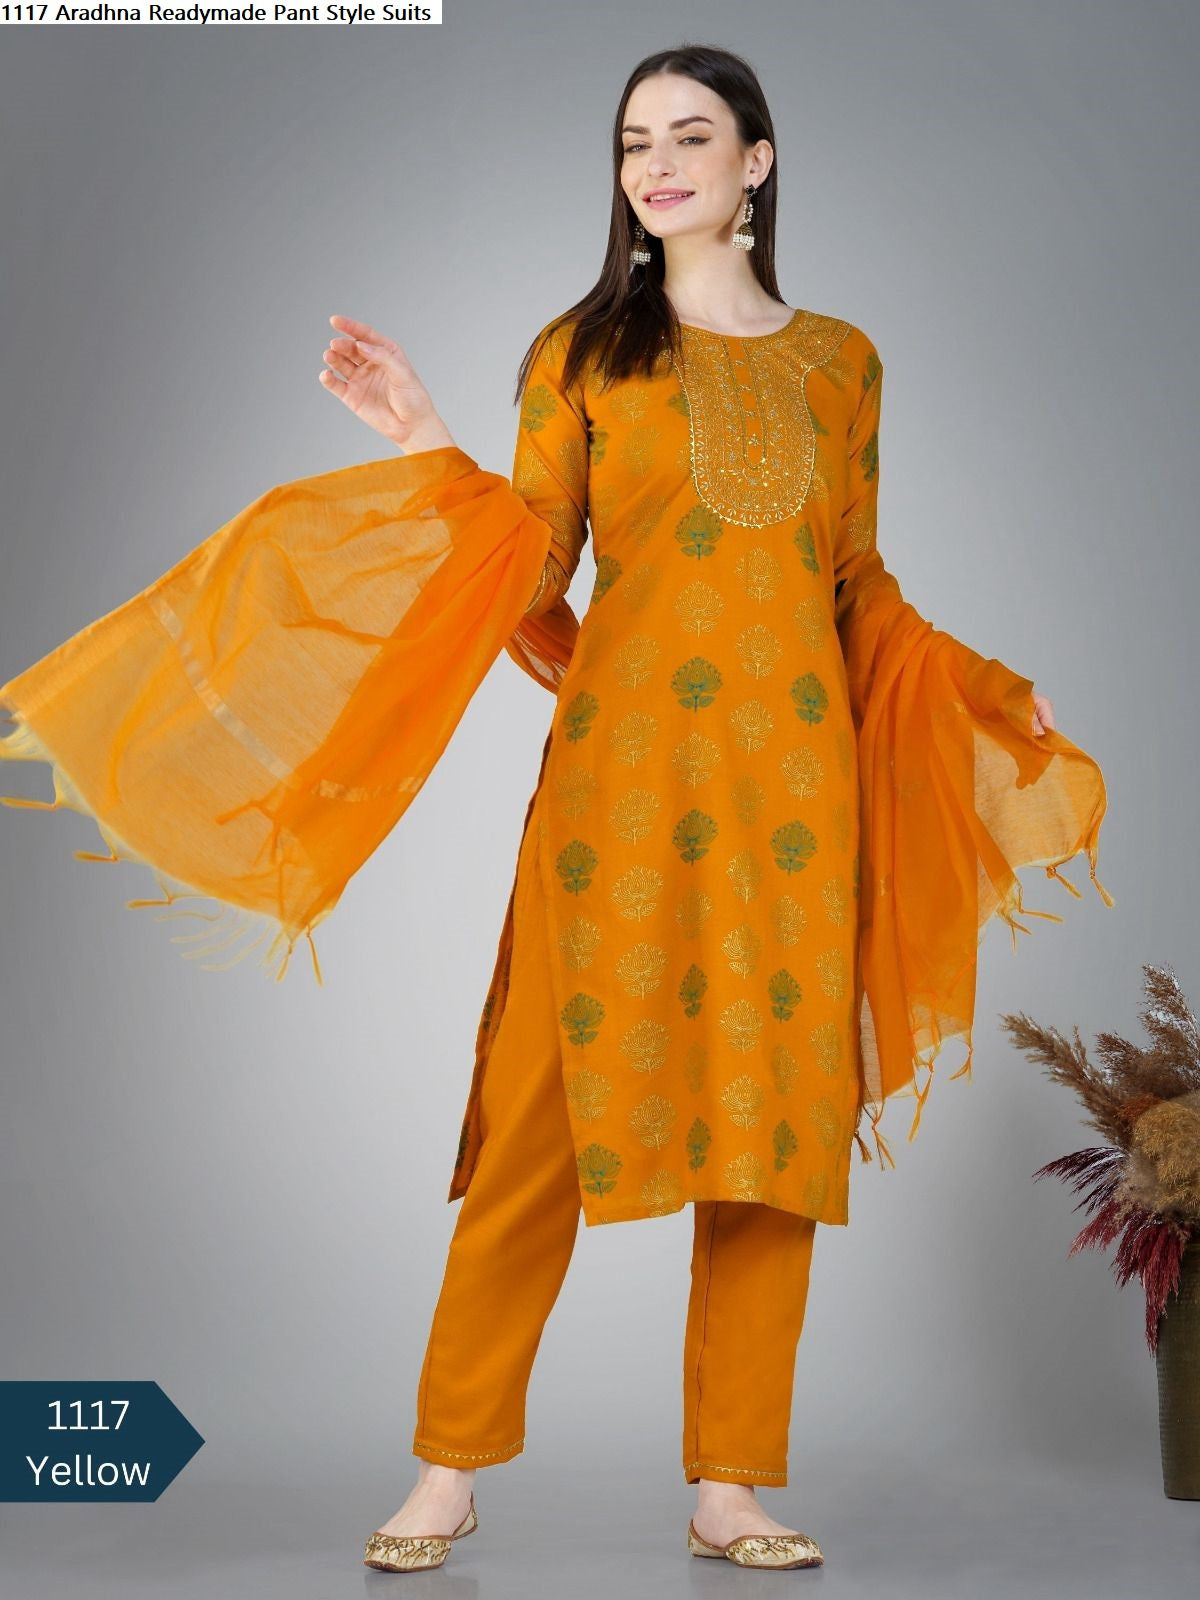 1117 Aradhna Cotton Readymade Pant Style Suits